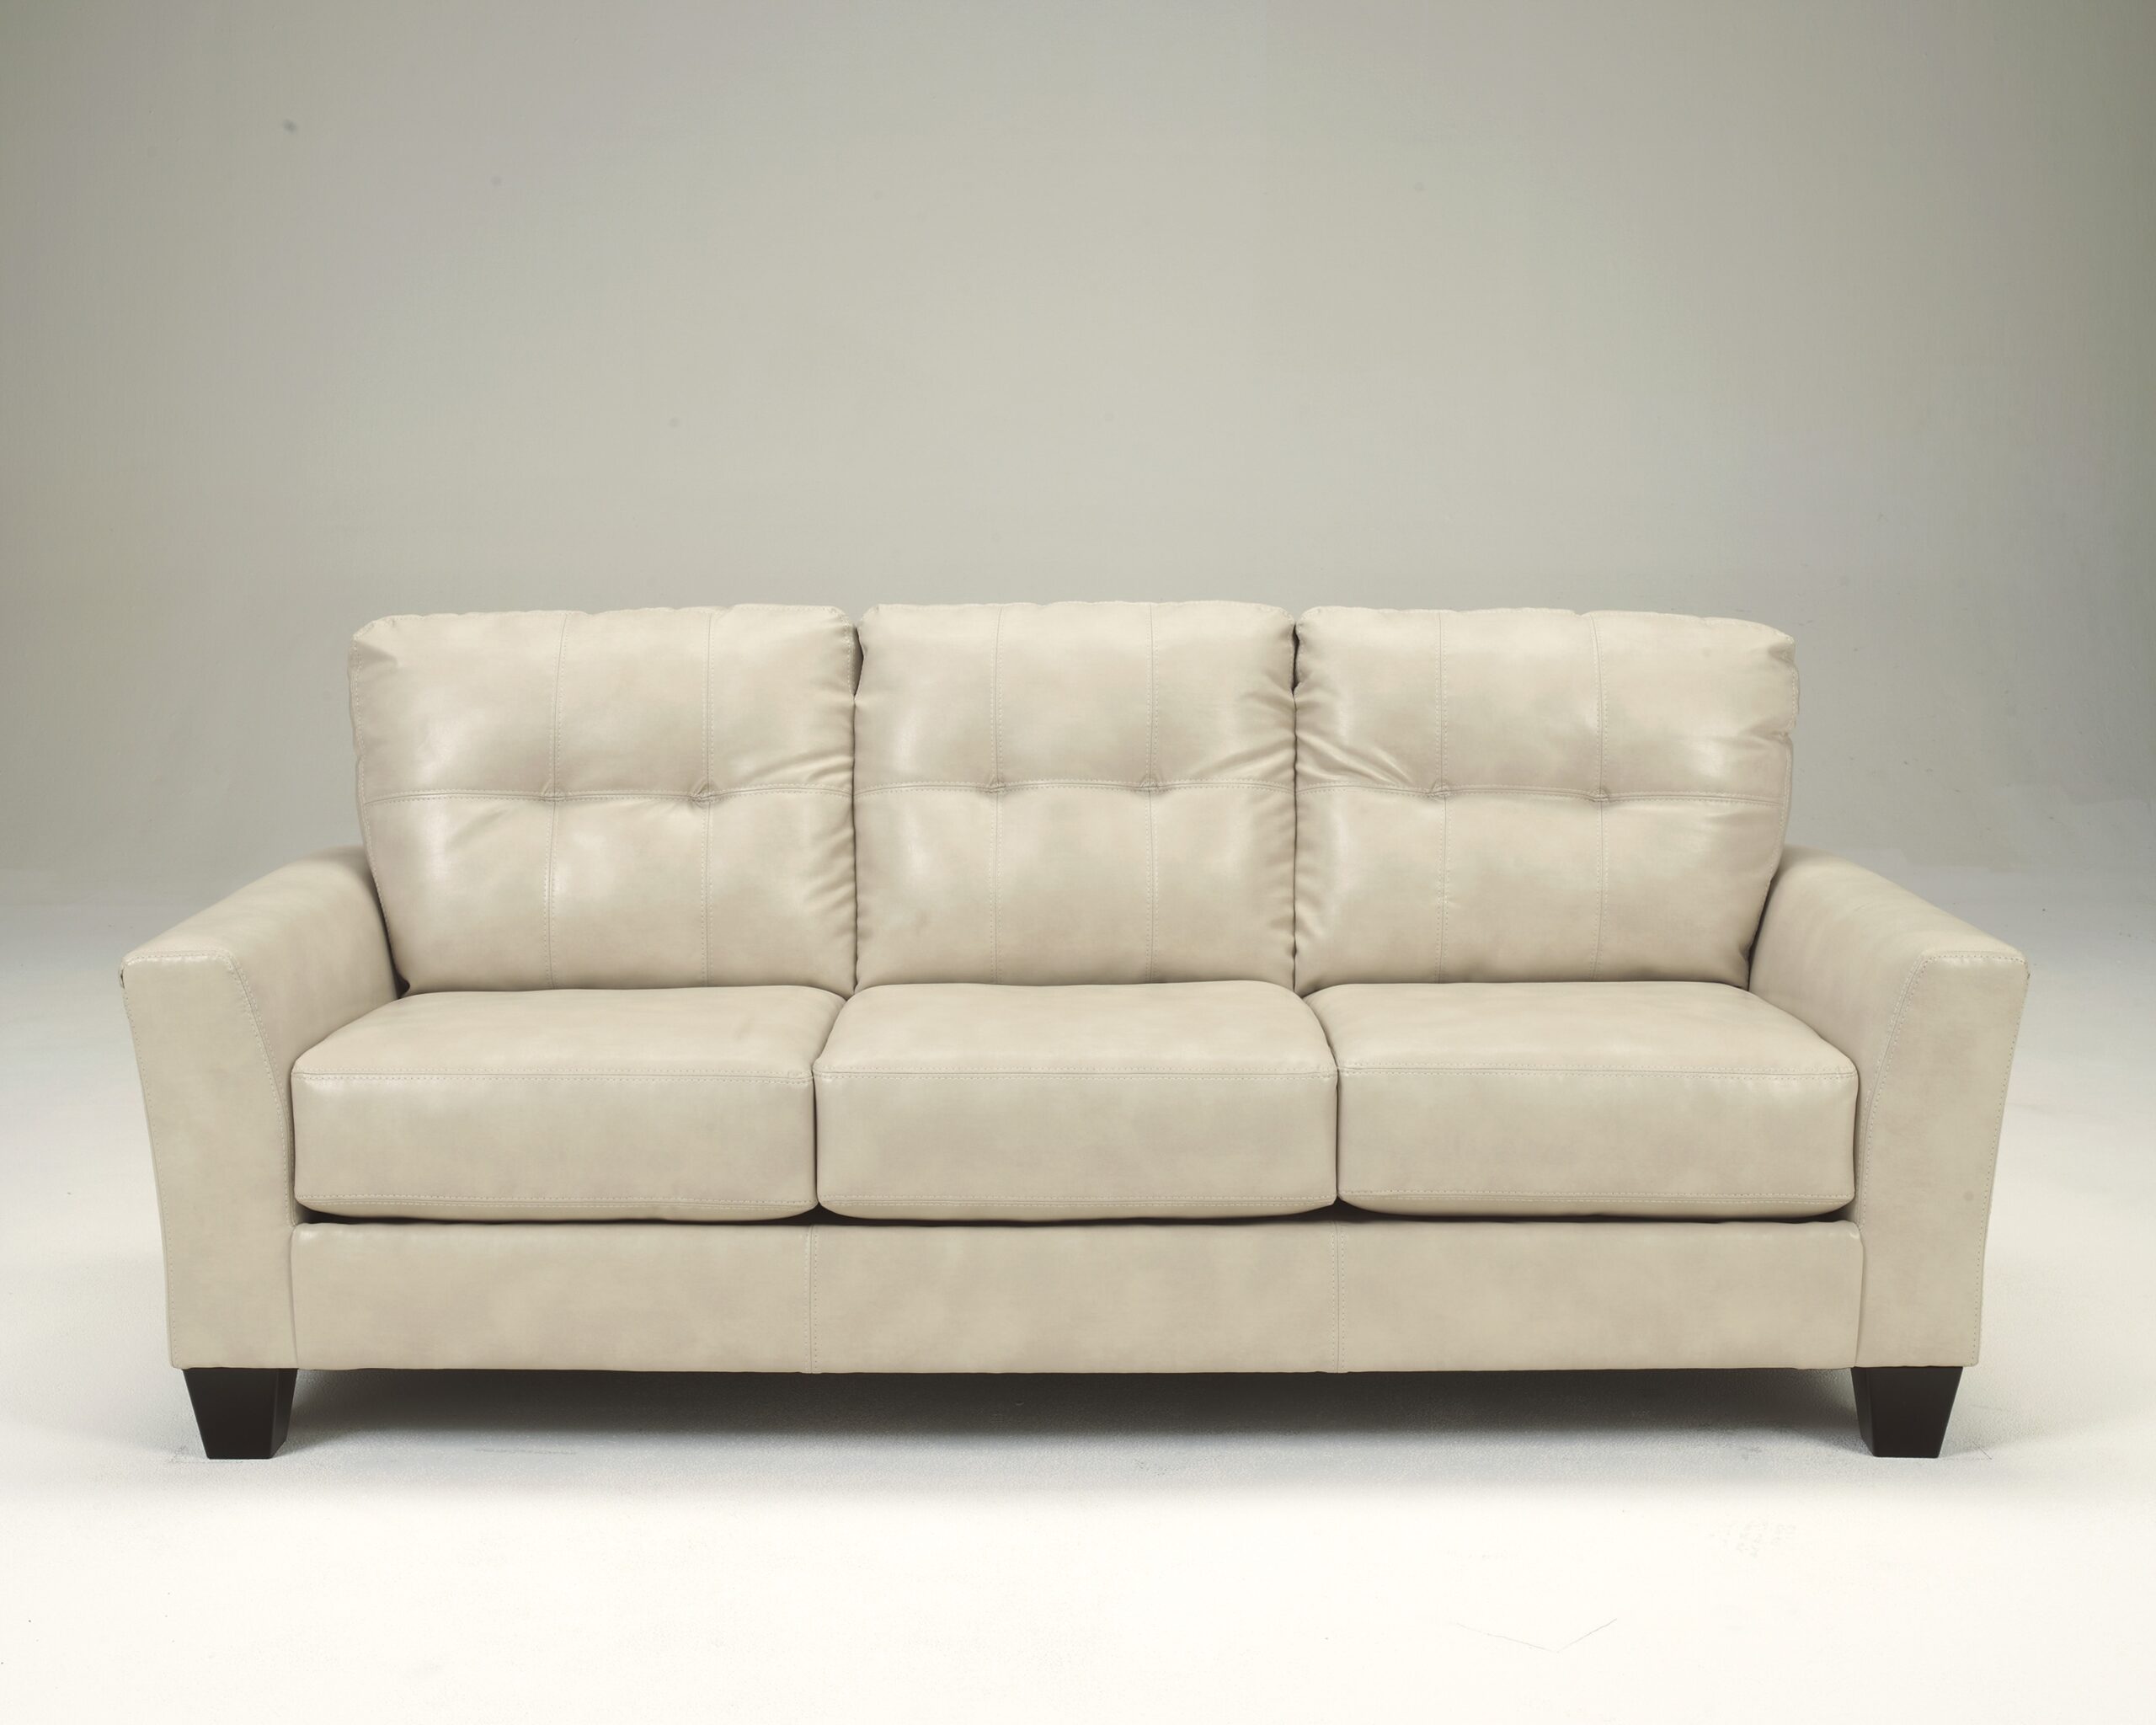 20 Best Off White Leather Sofas Scaled 